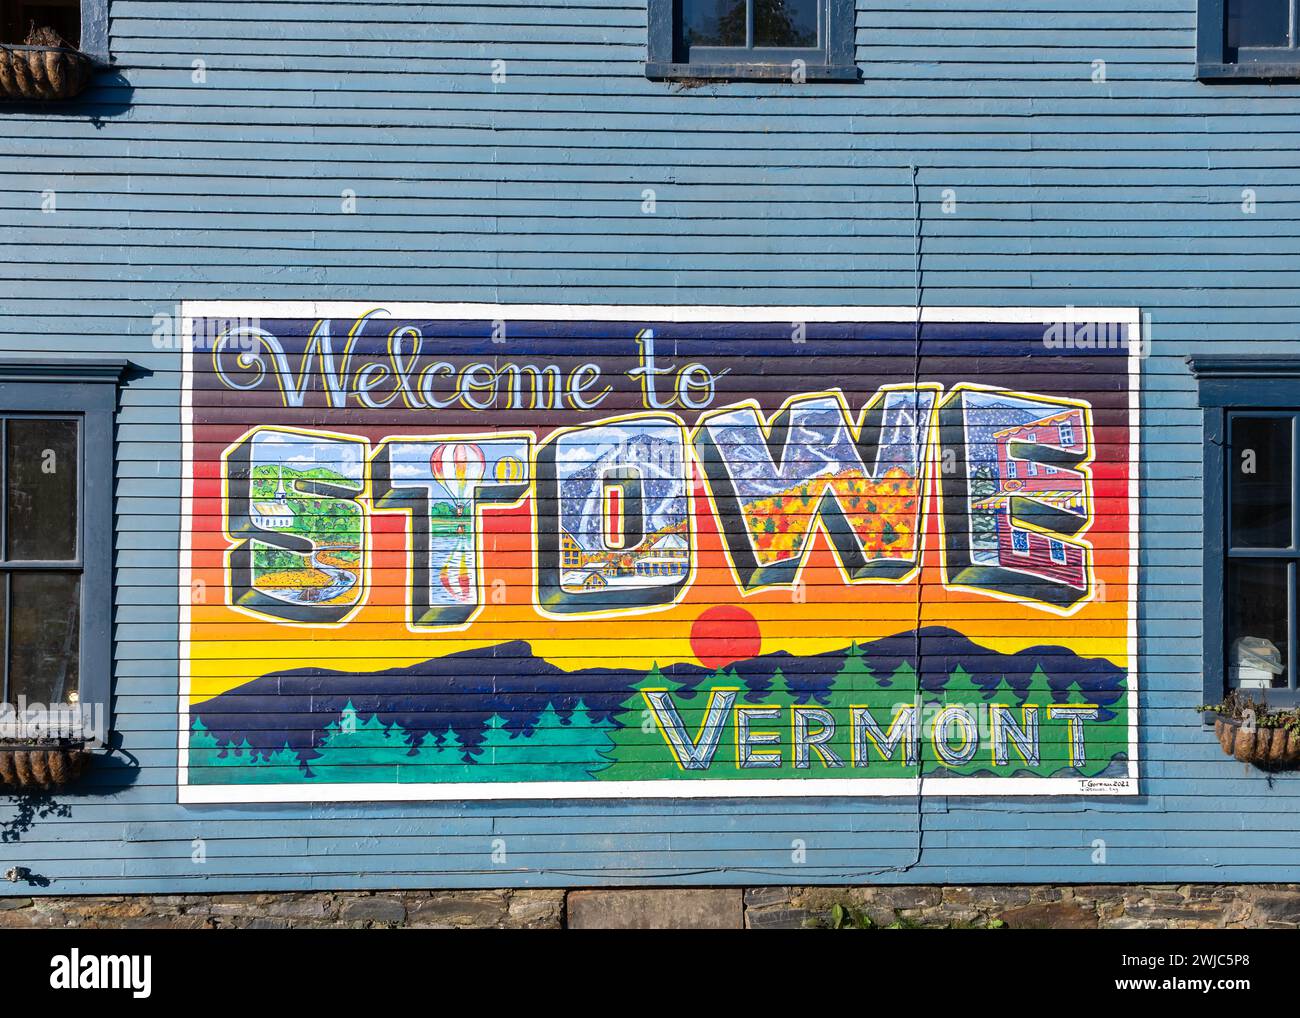 Welcome to Stowe sign, Stowe, Vermont Stock Photo